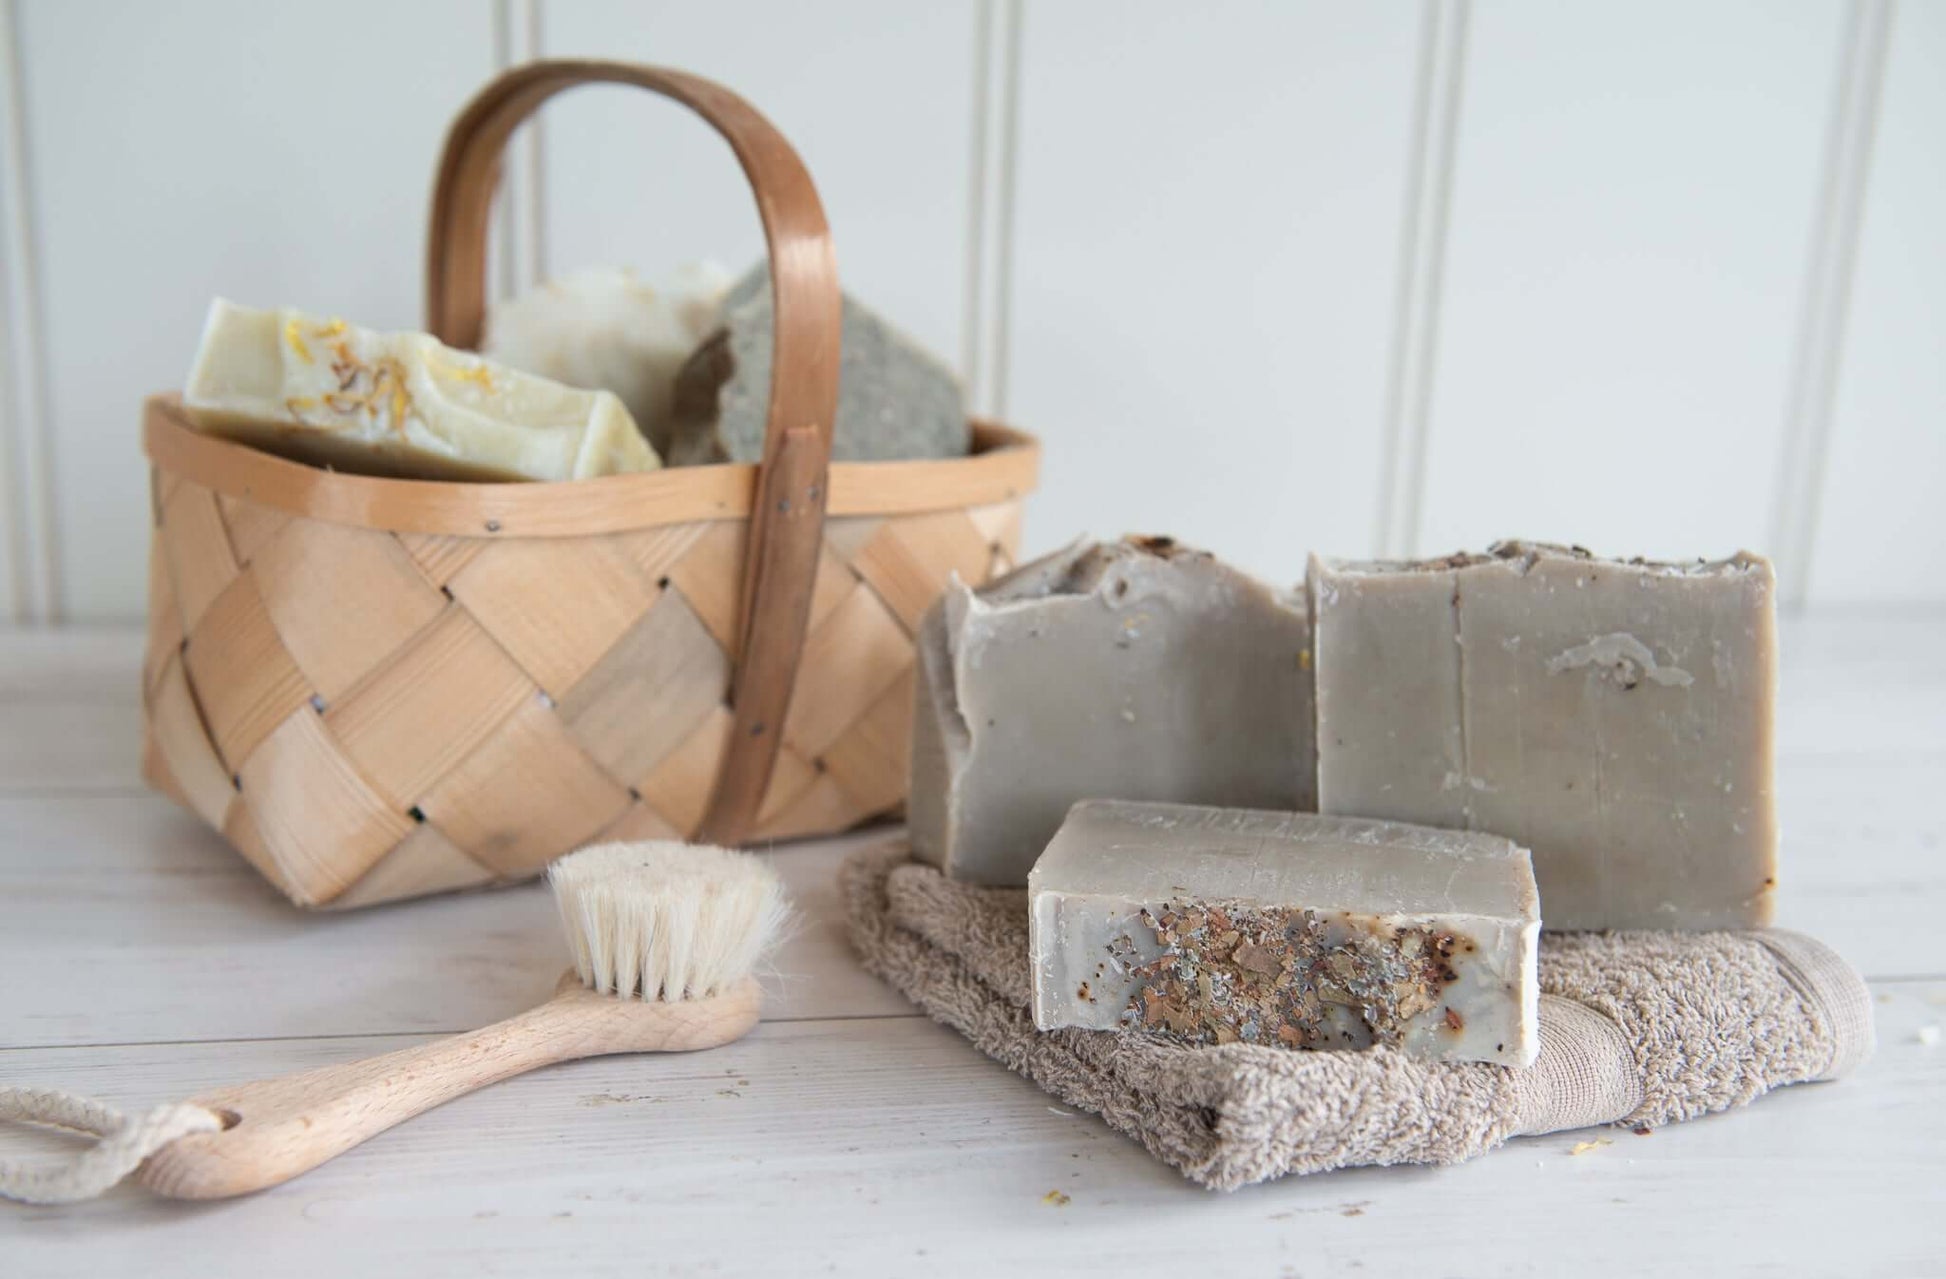 This handmade natural soap with  Mountain Eucalyptus & Australian Green Clay Soap deeply nourishes your skin